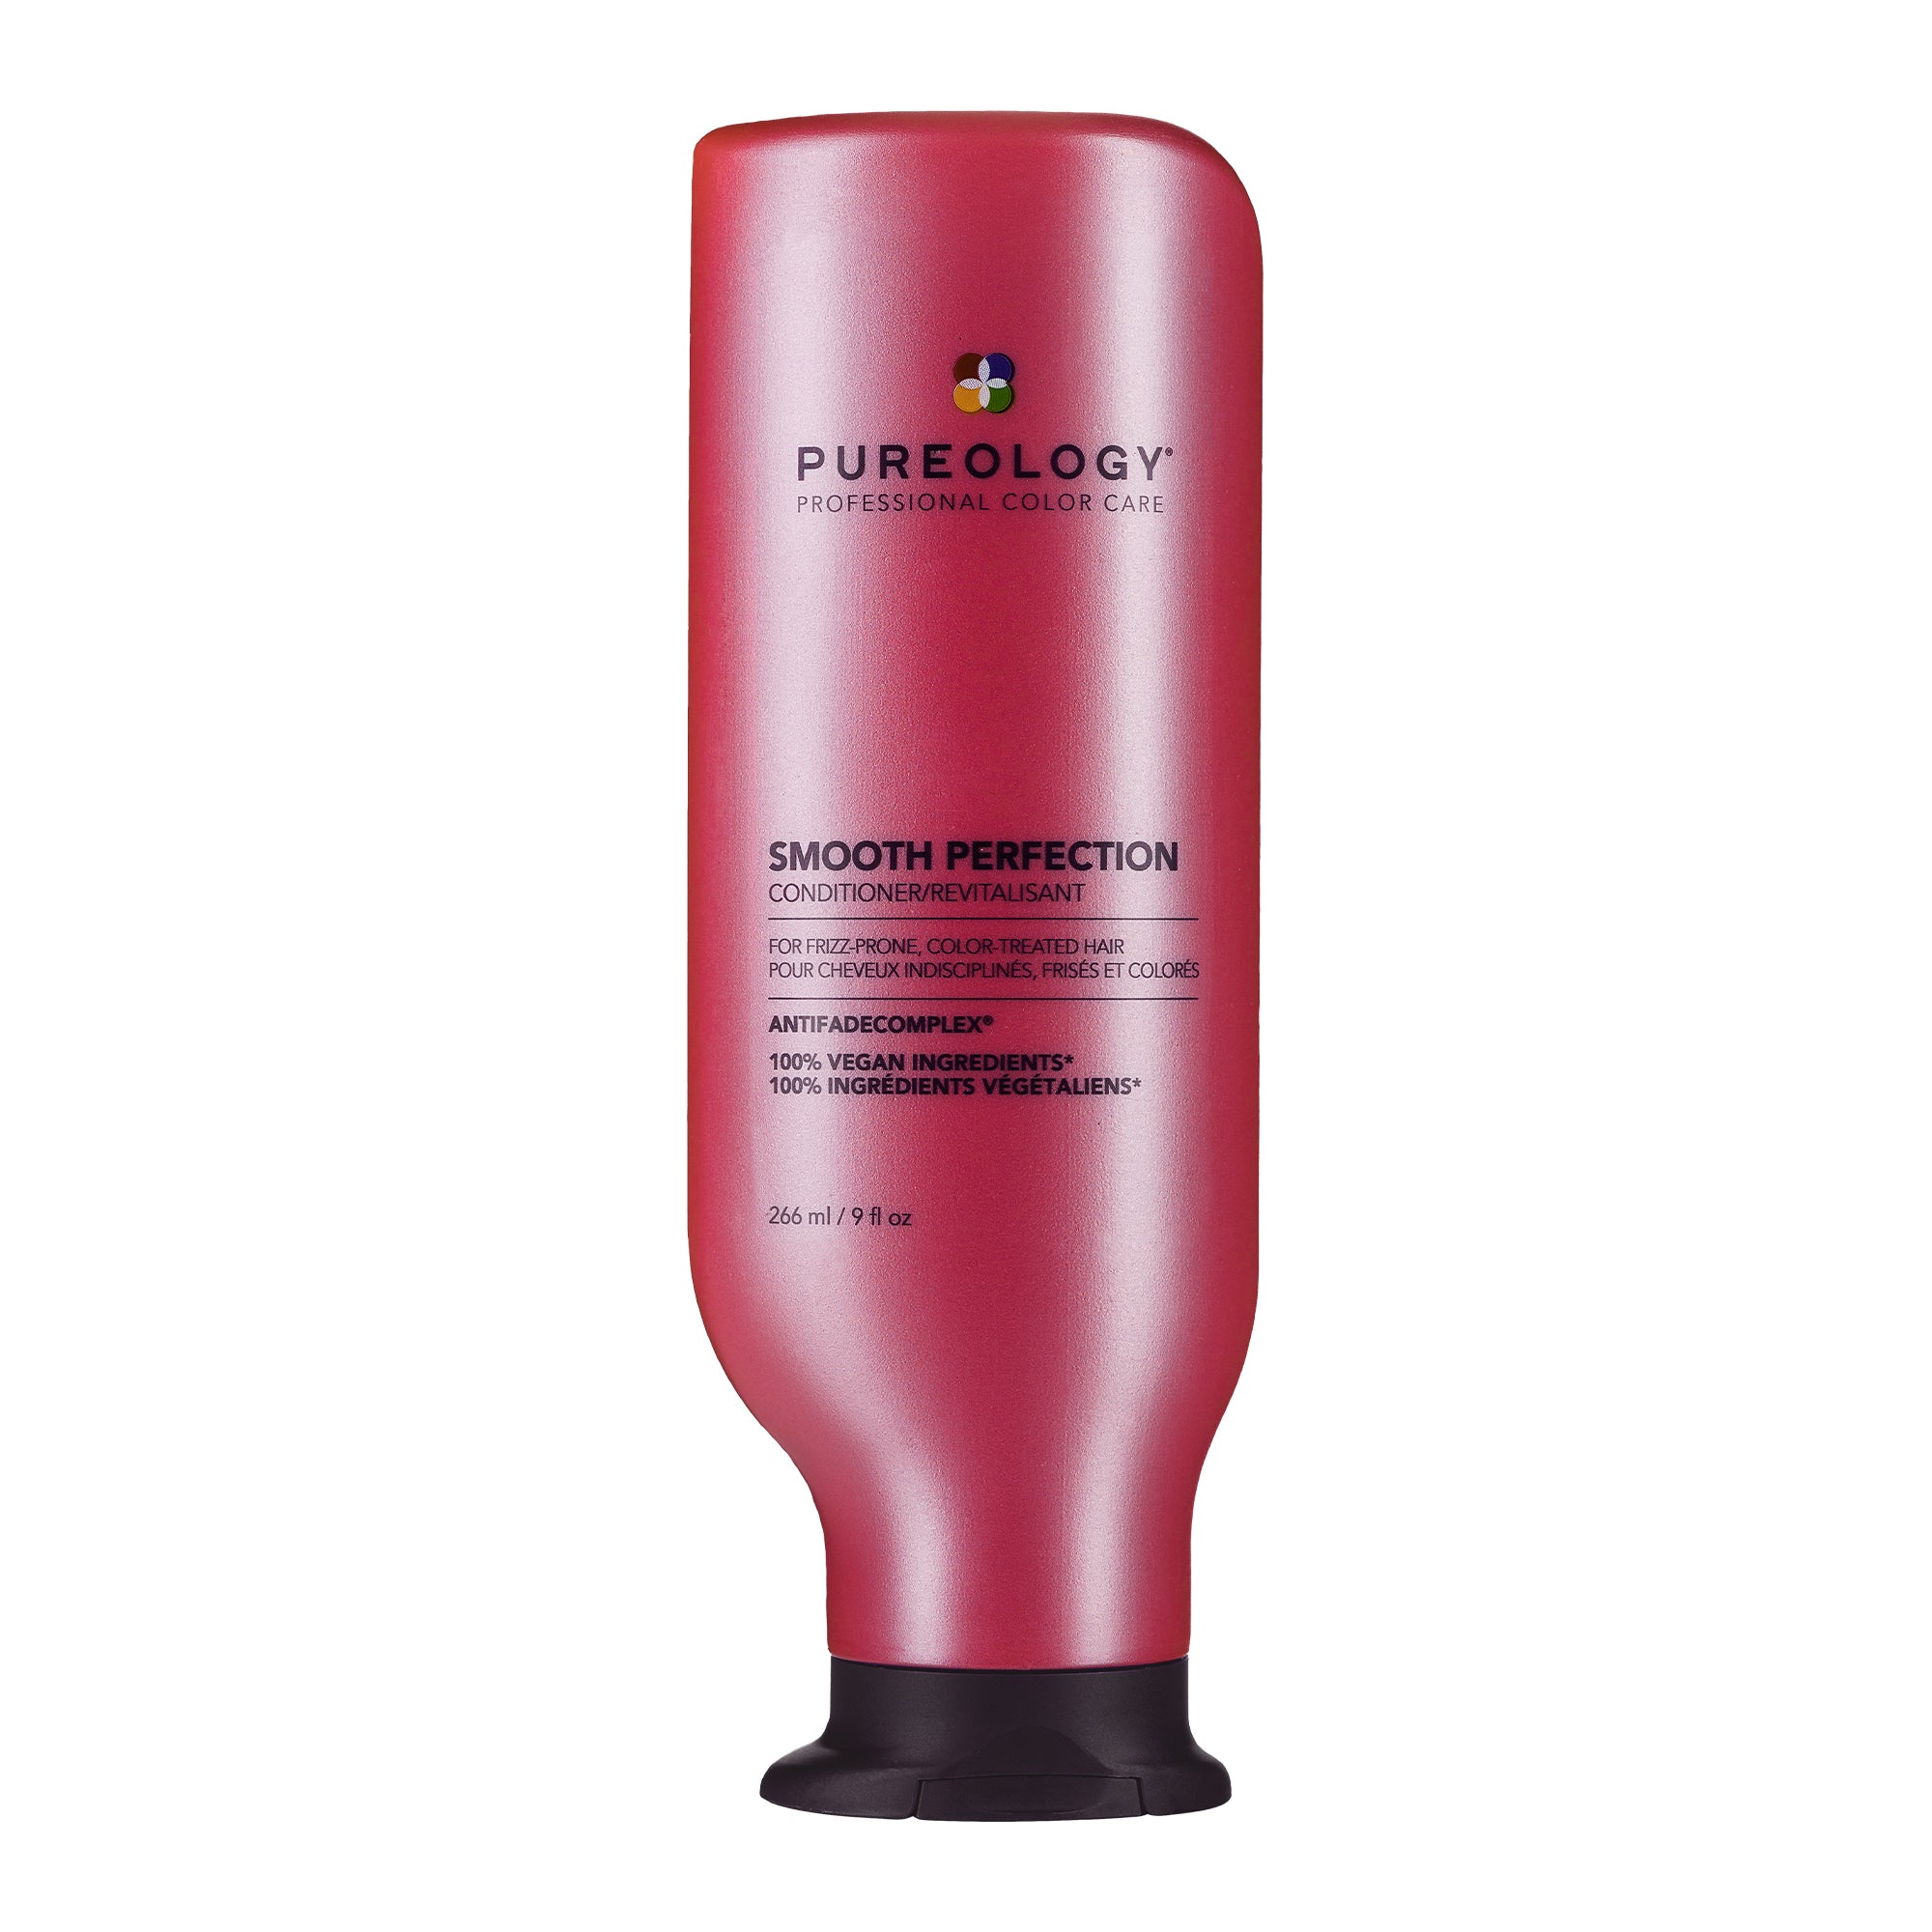 Pureology Smooth Perfection Smoothing Lotion 6.59 fl. oz. / 195ml